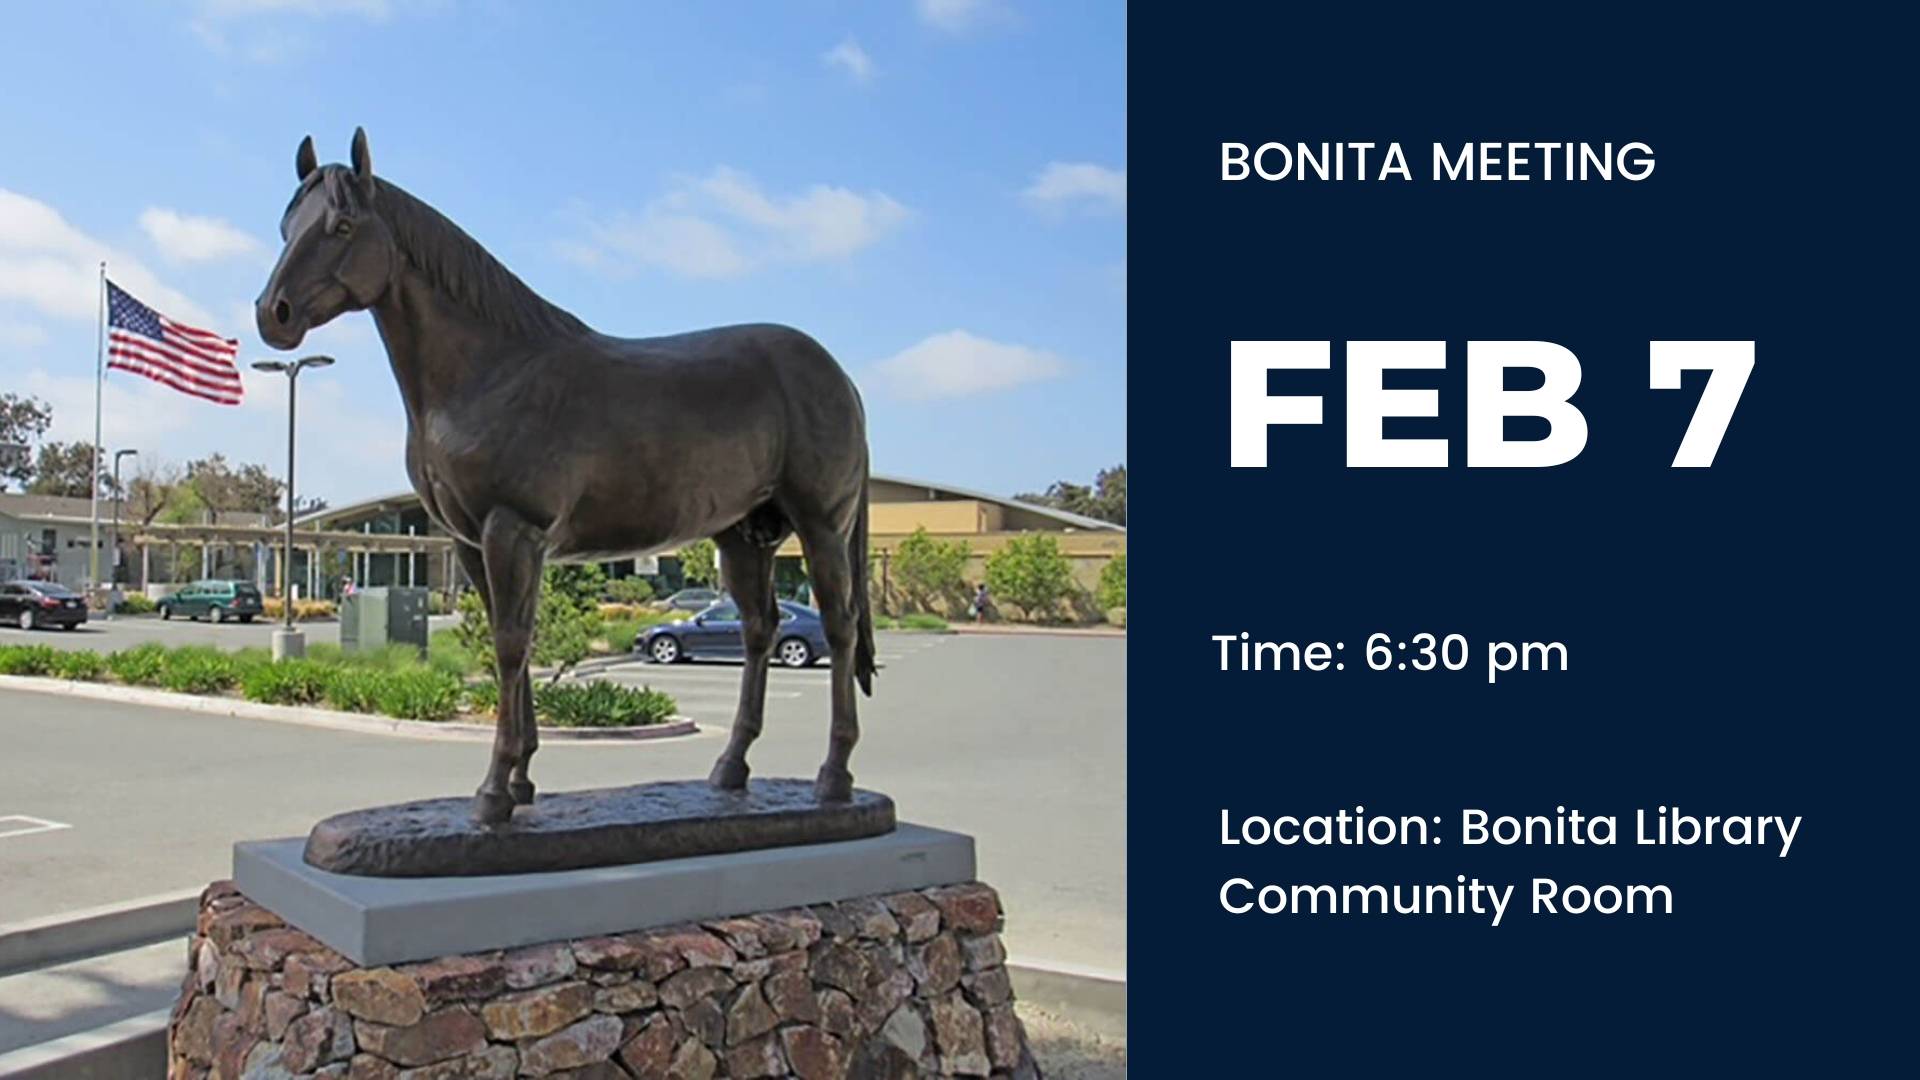 Please join the SVCA for their upcoming February 7th meeting to discuss news and important information on community topics. Read more.